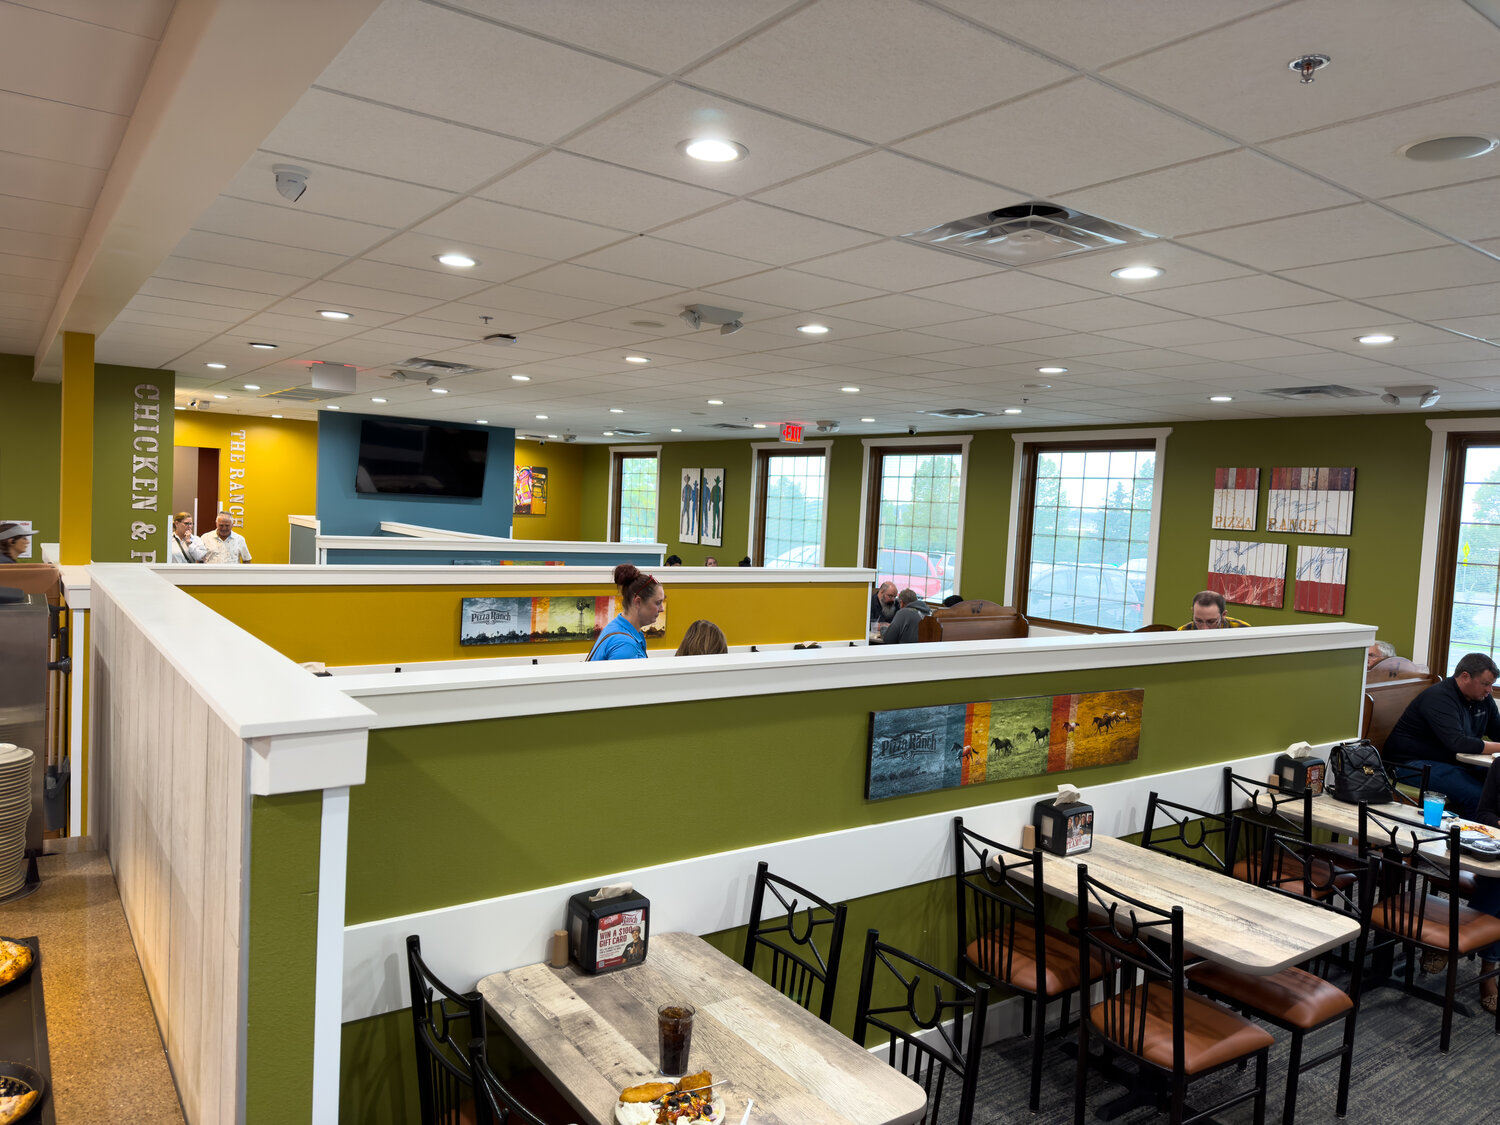 The Twin Cities area’s newest Pizza Ranch is their newest design concept with a much more open feel and brighter colors compared to their historically rustic look.